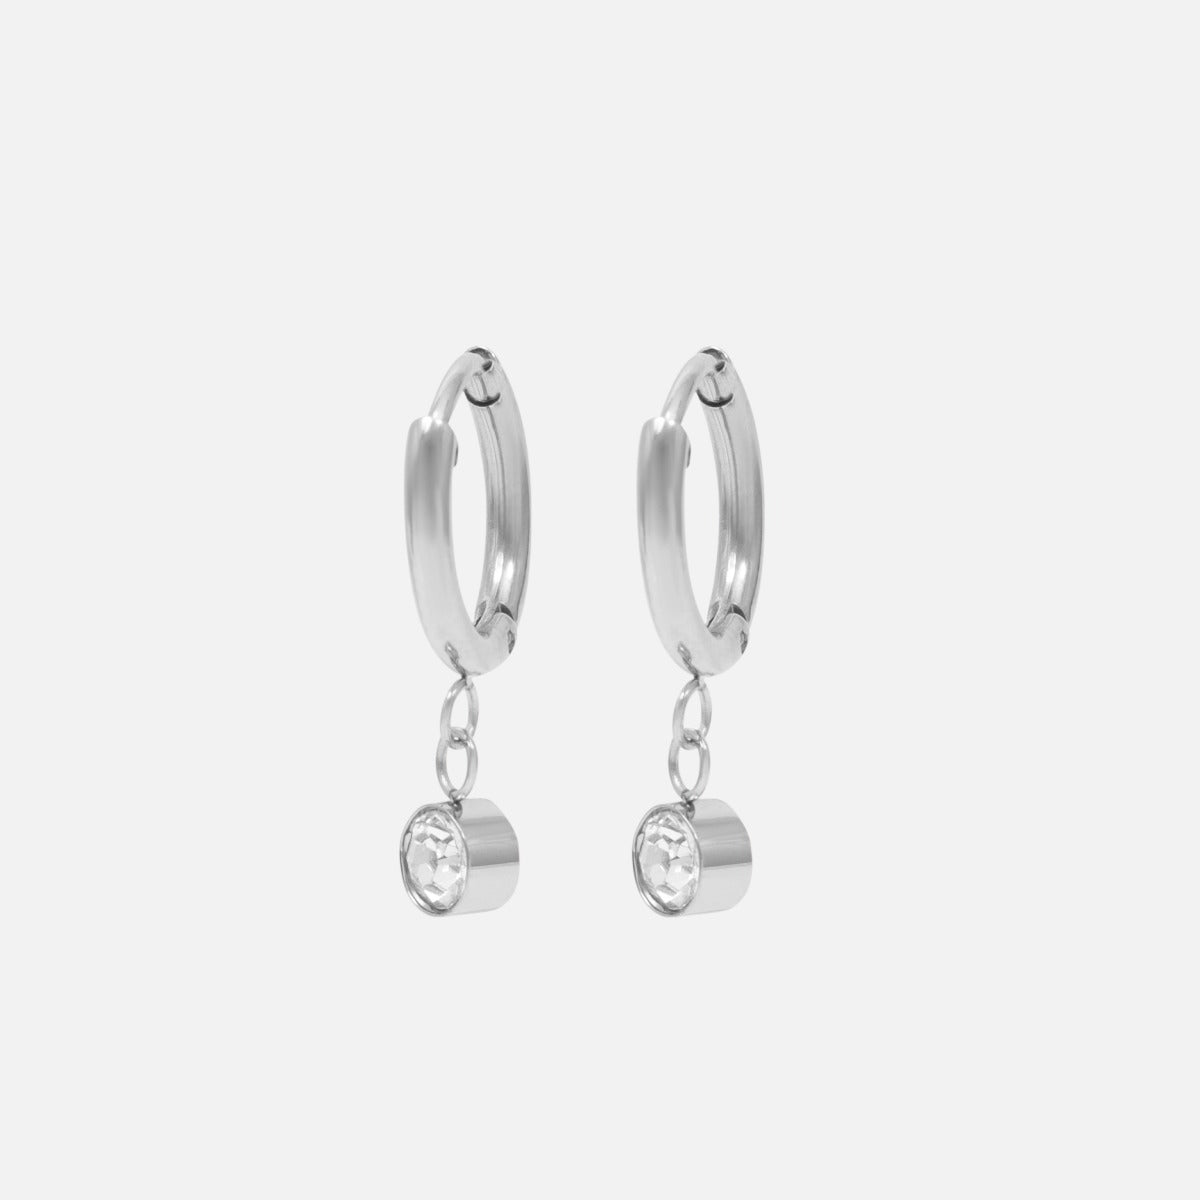 Small silver stainless steel huggies with zirconia stone